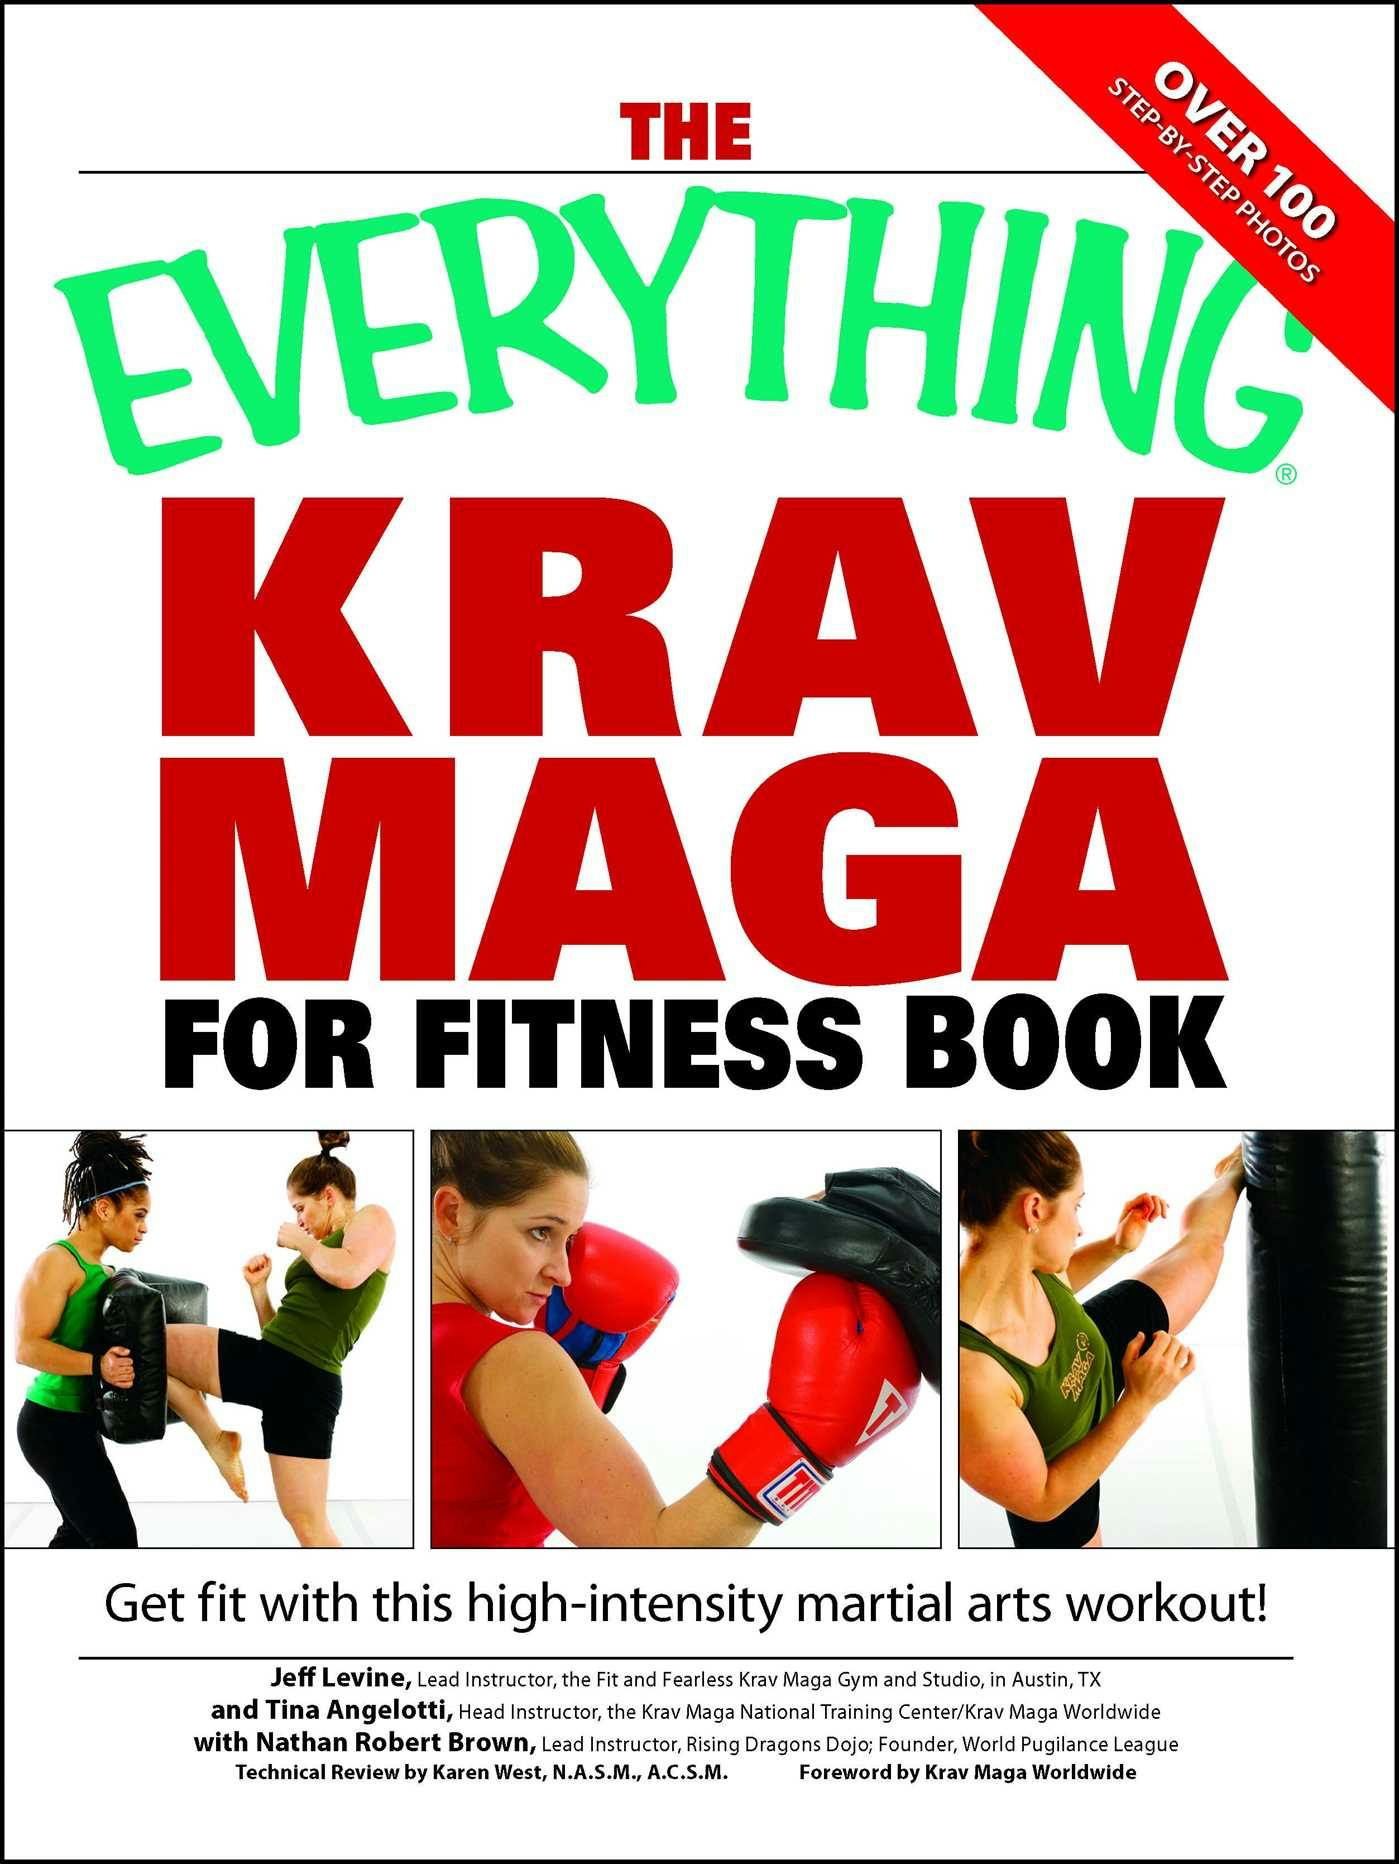 The Everything Krav Maga for Fitness Book: Get fit fast with this high-intensity martial arts workout - Tina Angelotti, Nathan Brown, Jeff Levine